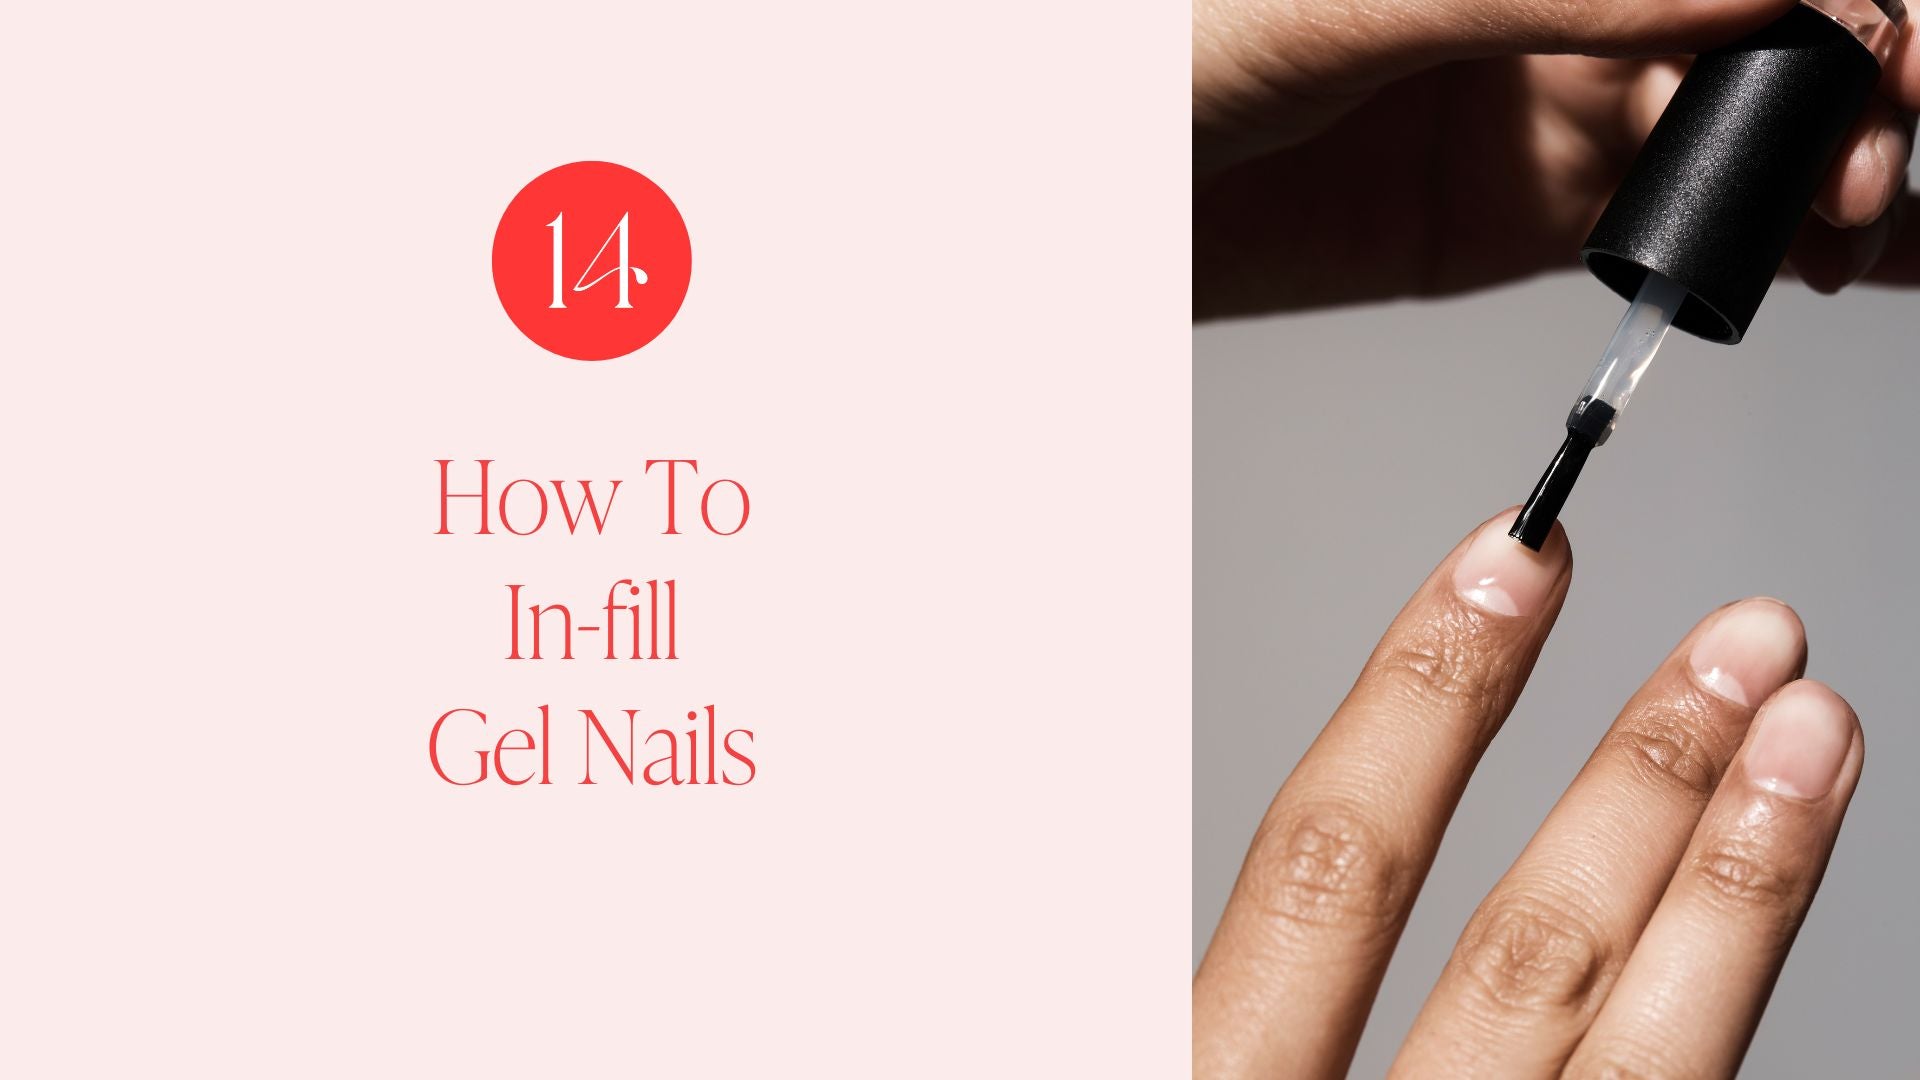 Load video: HOW TO IN-FILL GEL NAILS WITH BUILDER